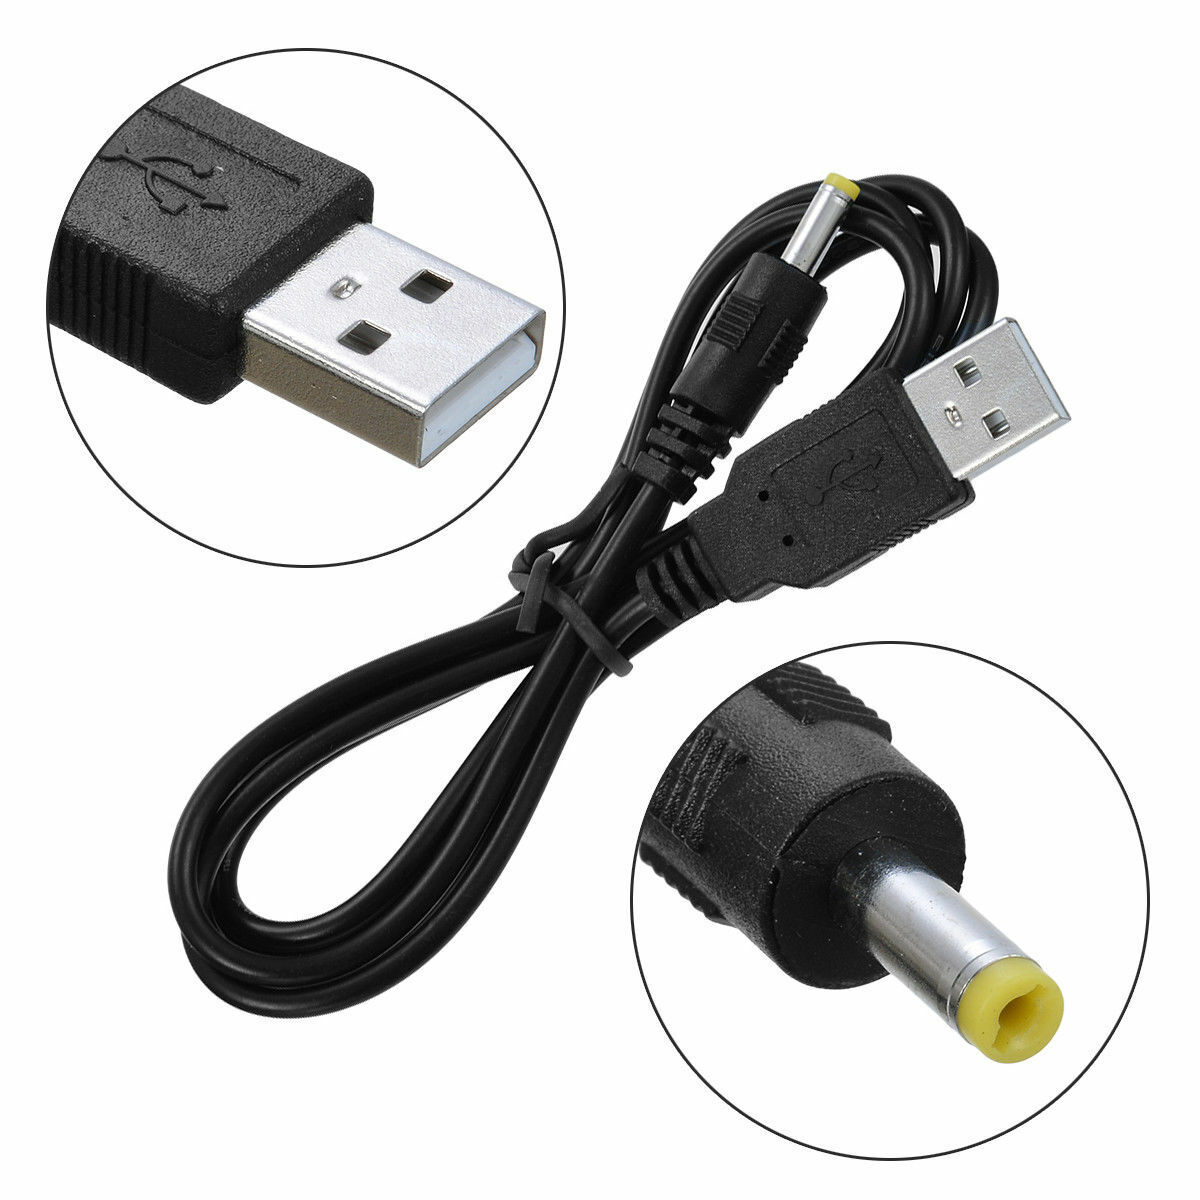 USB Charger Power Cable Cord for Sony SRS-M55 M5 A1 SRS-XB30 SRS-BTS50 Speaker Brand Unbranded/Generic Compatible Bran - Click Image to Close